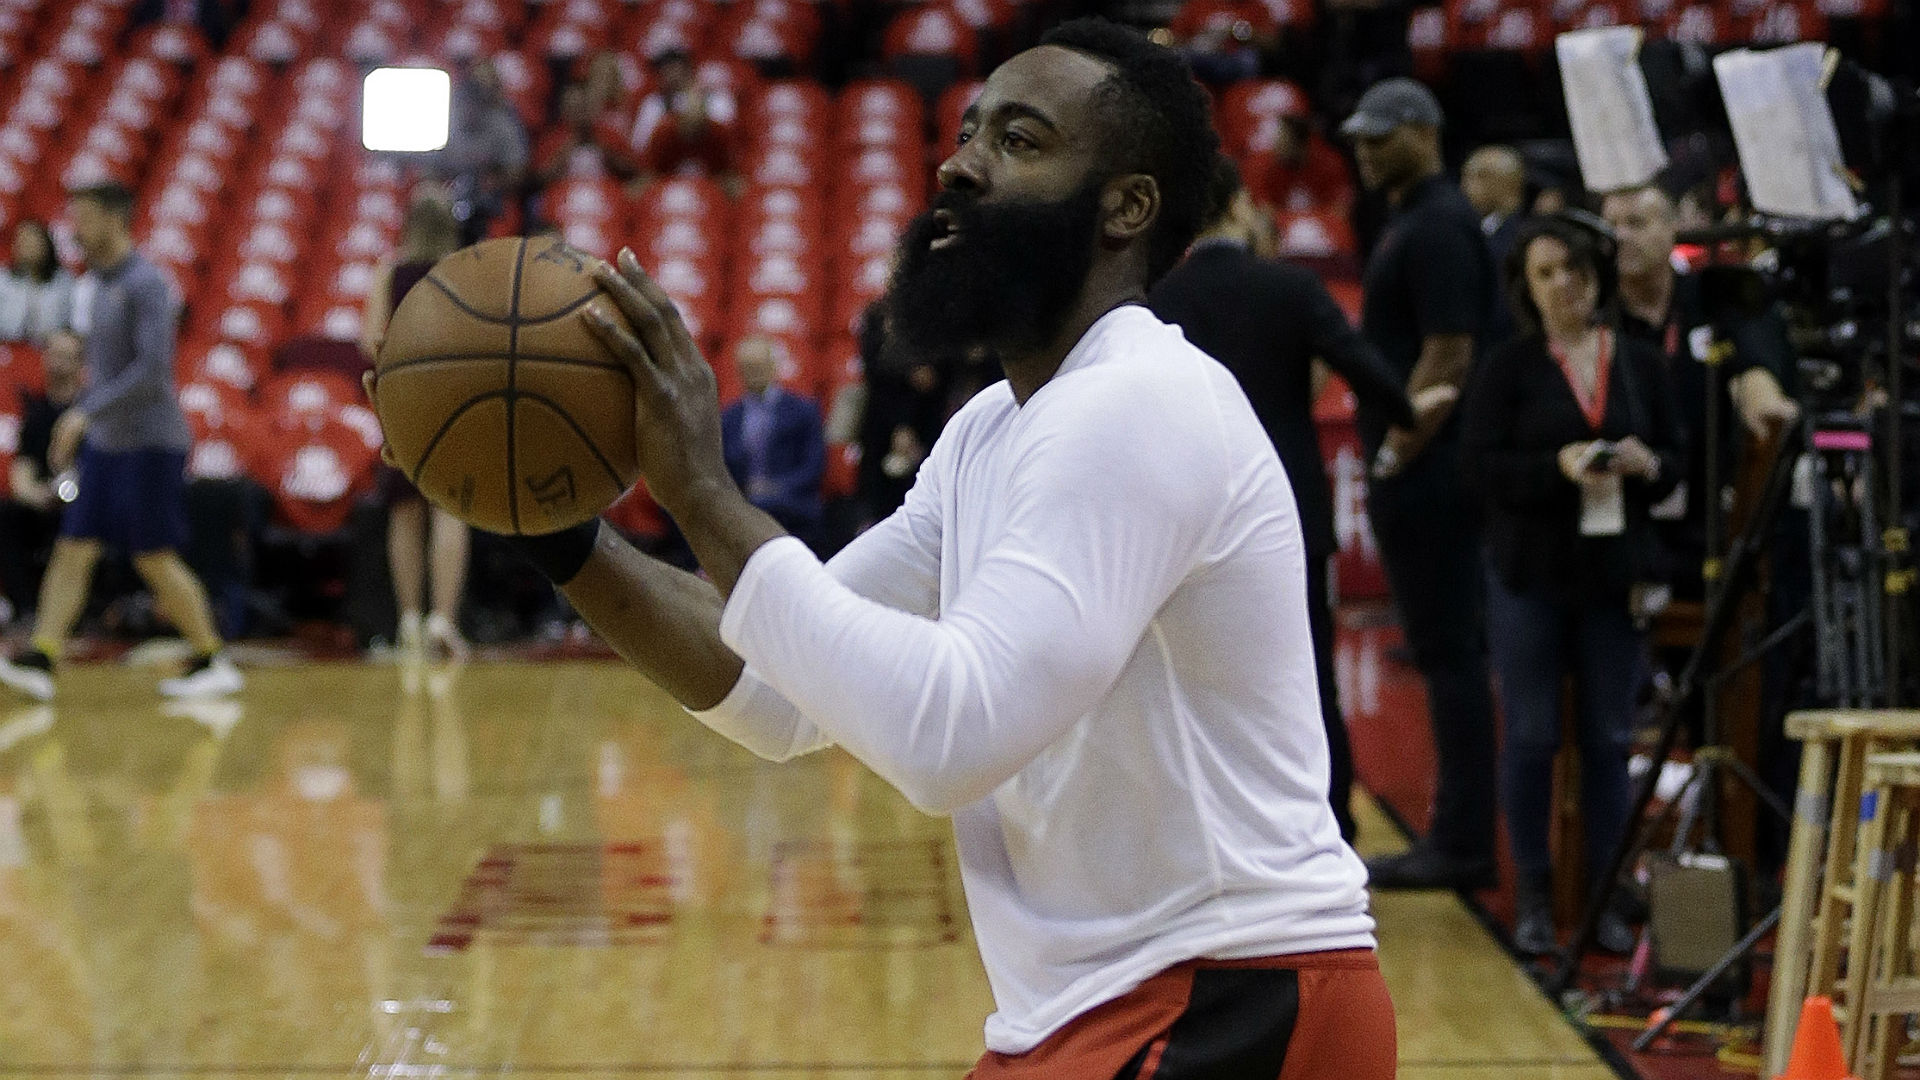 James Harden discussed his championship hopes and playing alongside Houston Rockets recruit Russell Westbrook.